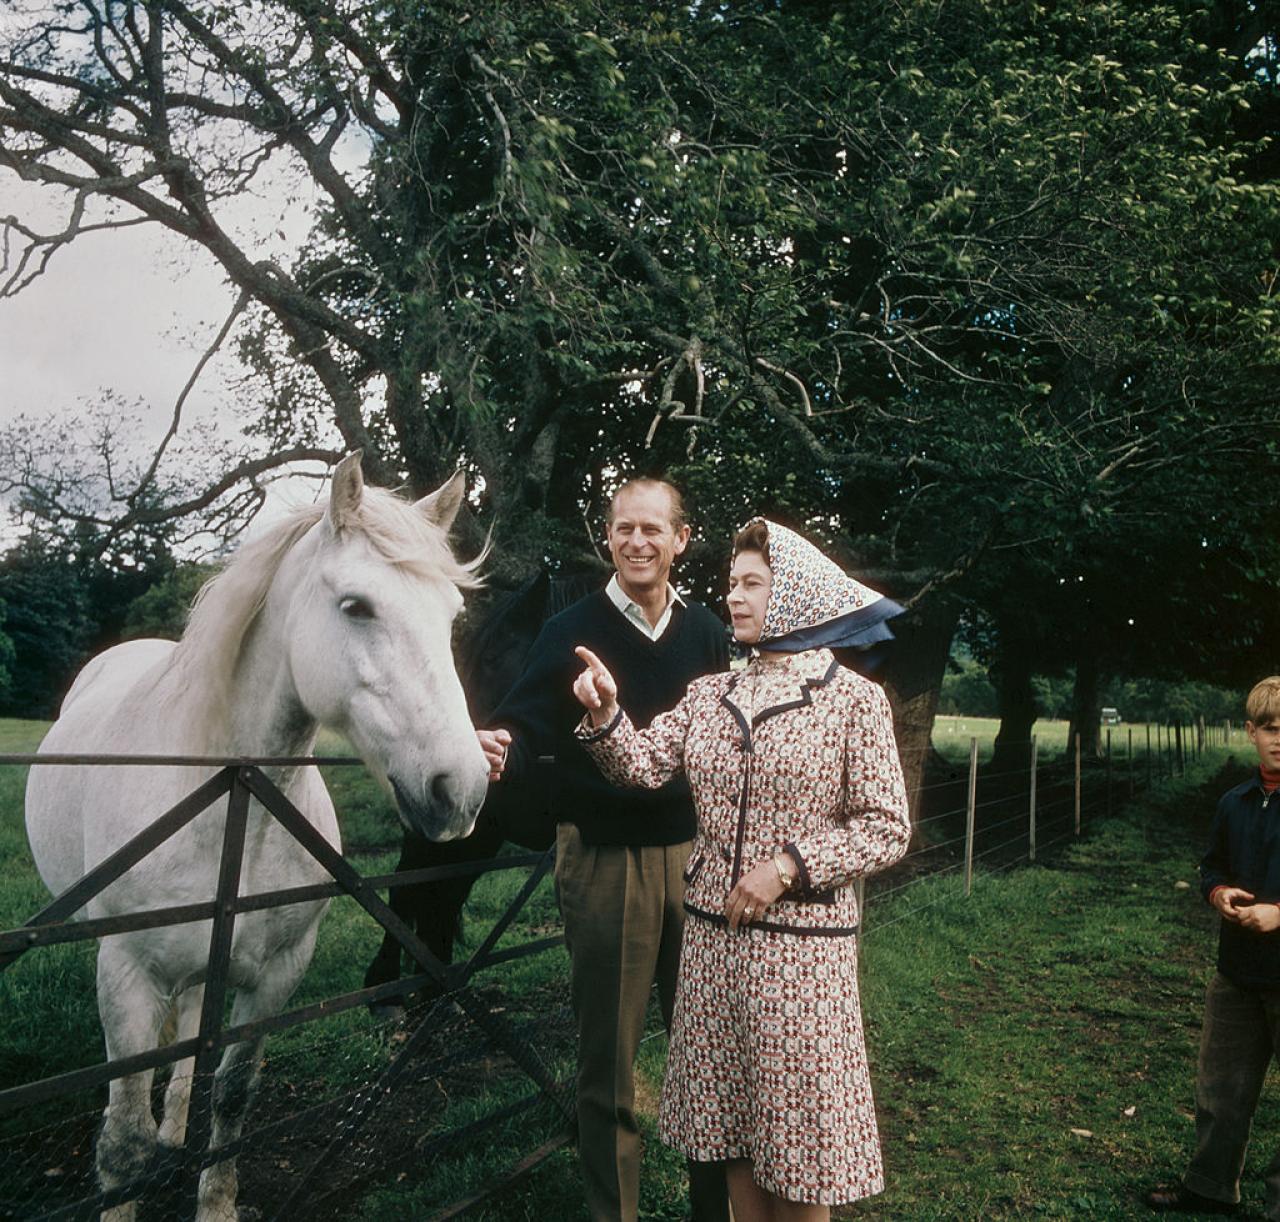 Queen Elizabeth II and Prince Philip visit a farm on the Balmoral estate in Scotland, during their Silver Wedding anniversary year, September 1972. (Photo by Fox Photos/Hulton Archive/Getty Images)